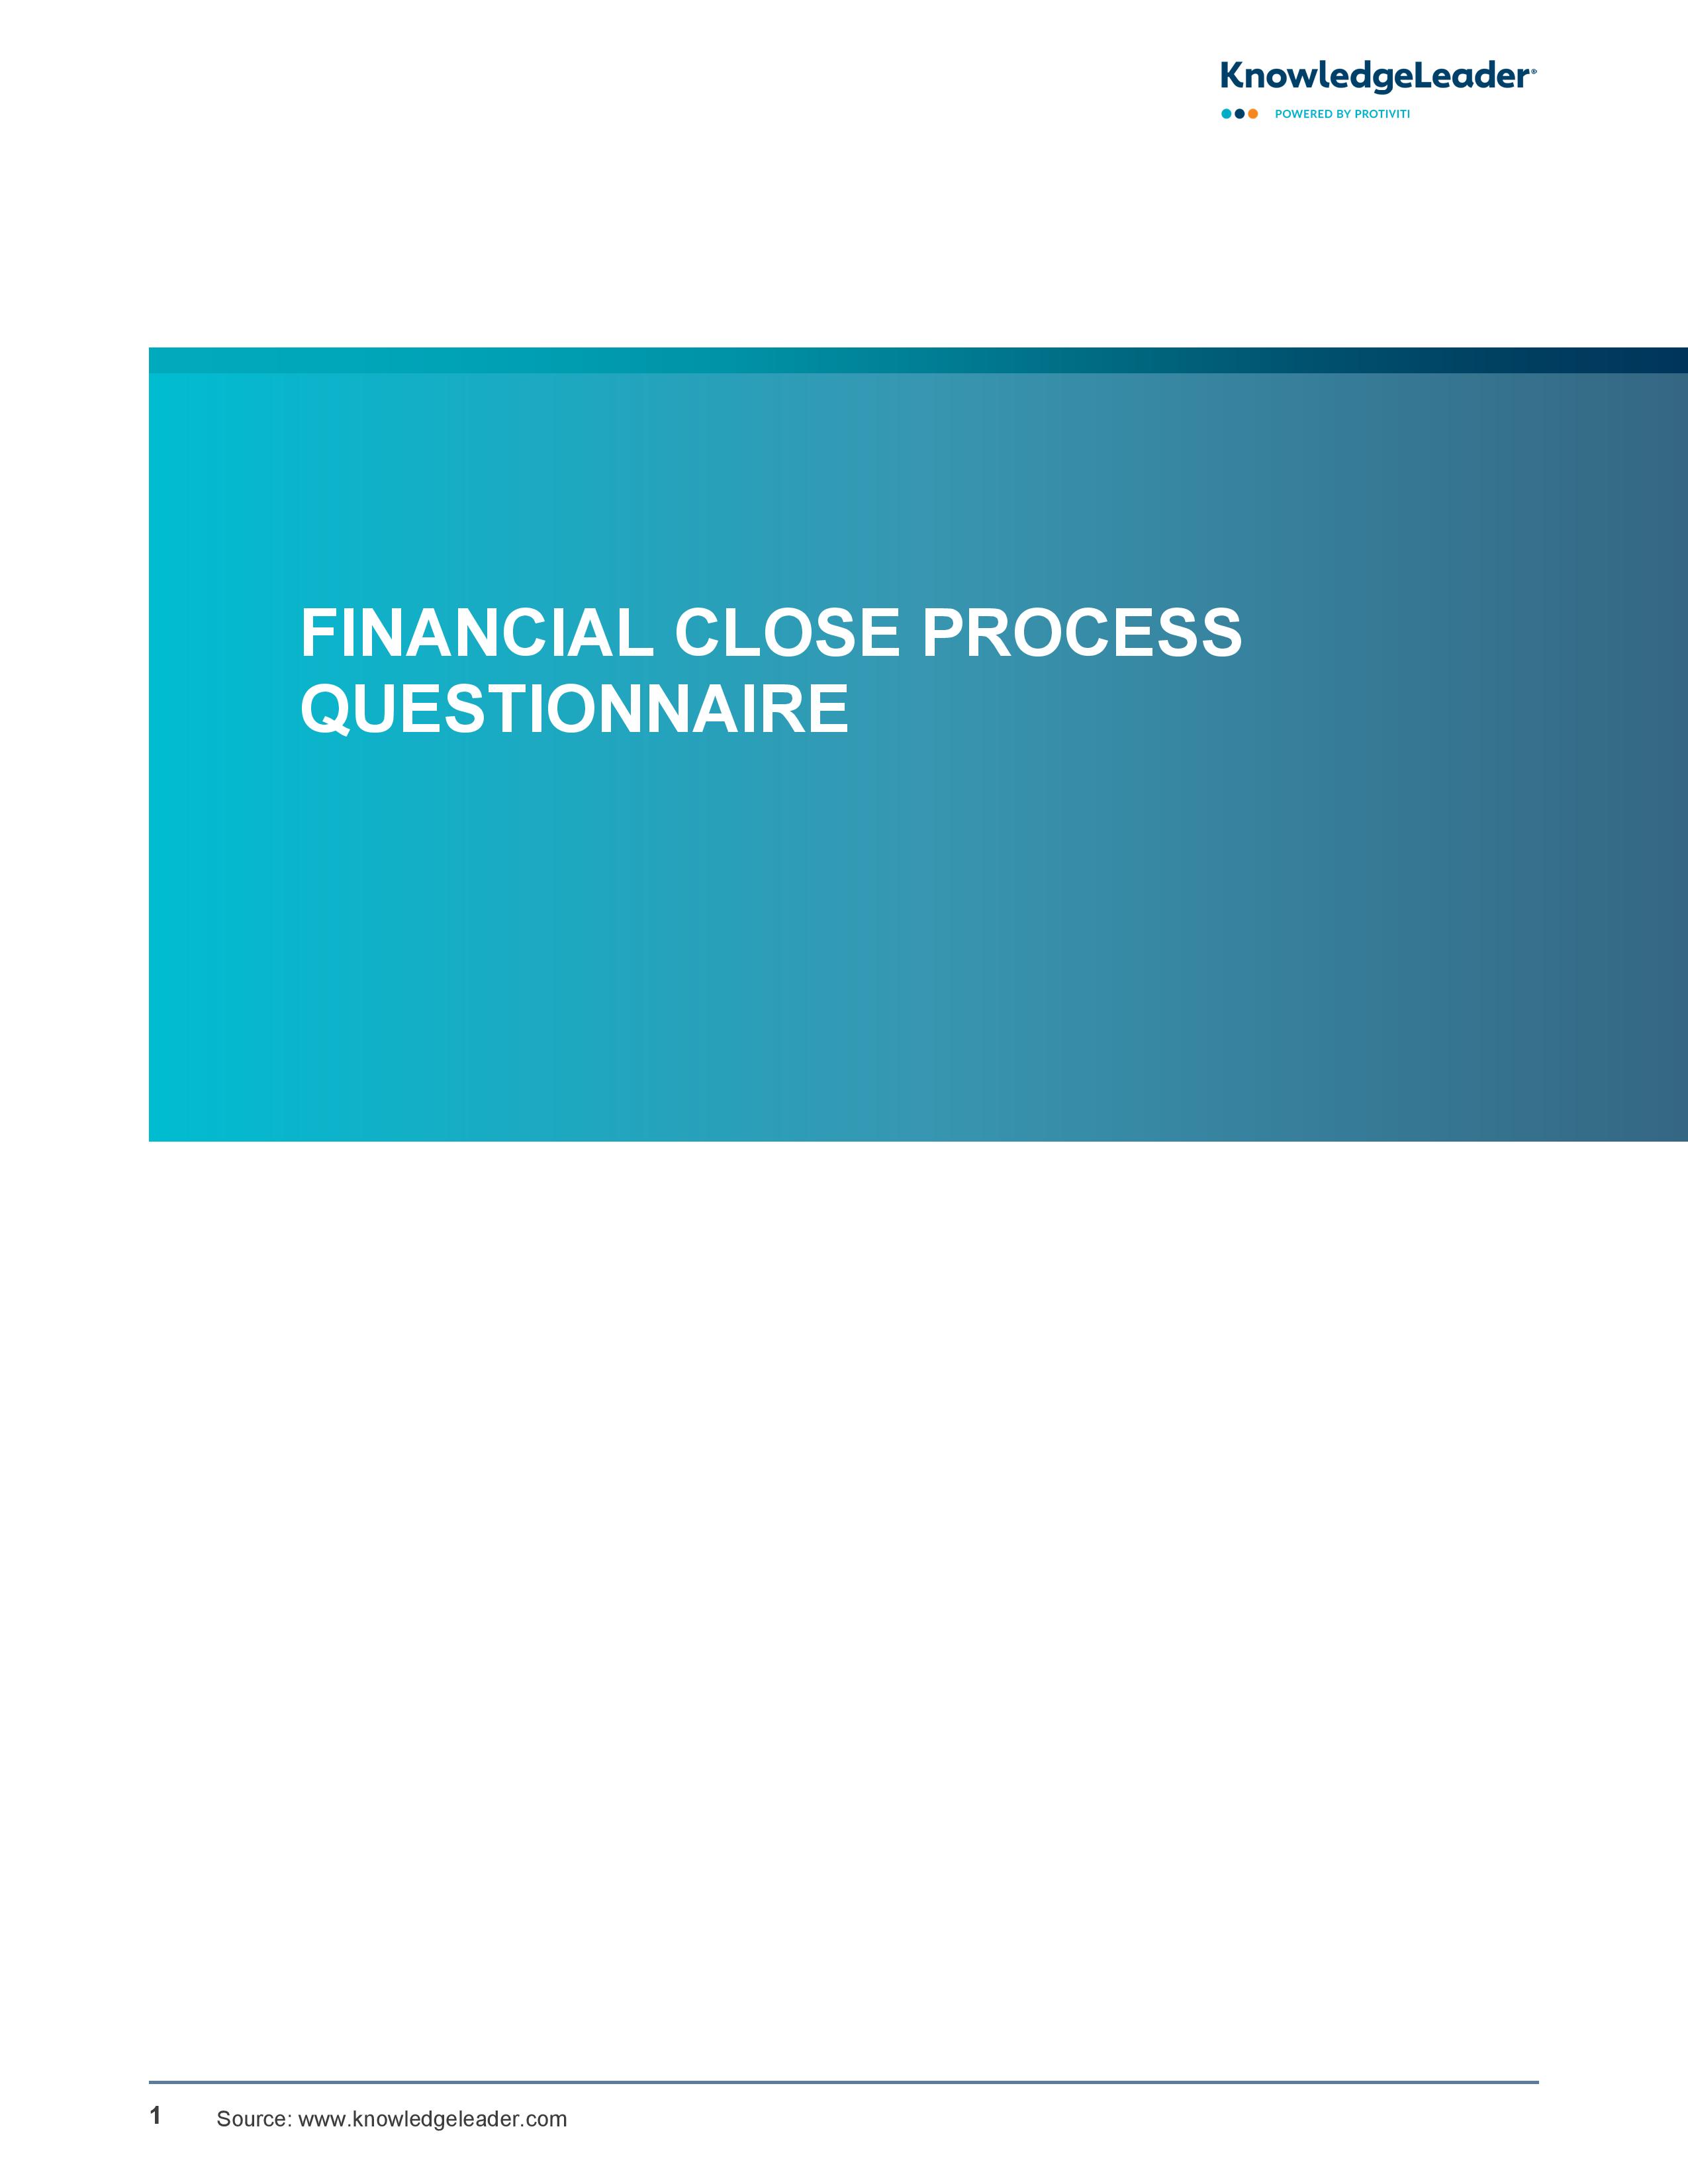 Screenshot of the First Page of Financial Close Process Questionnaire